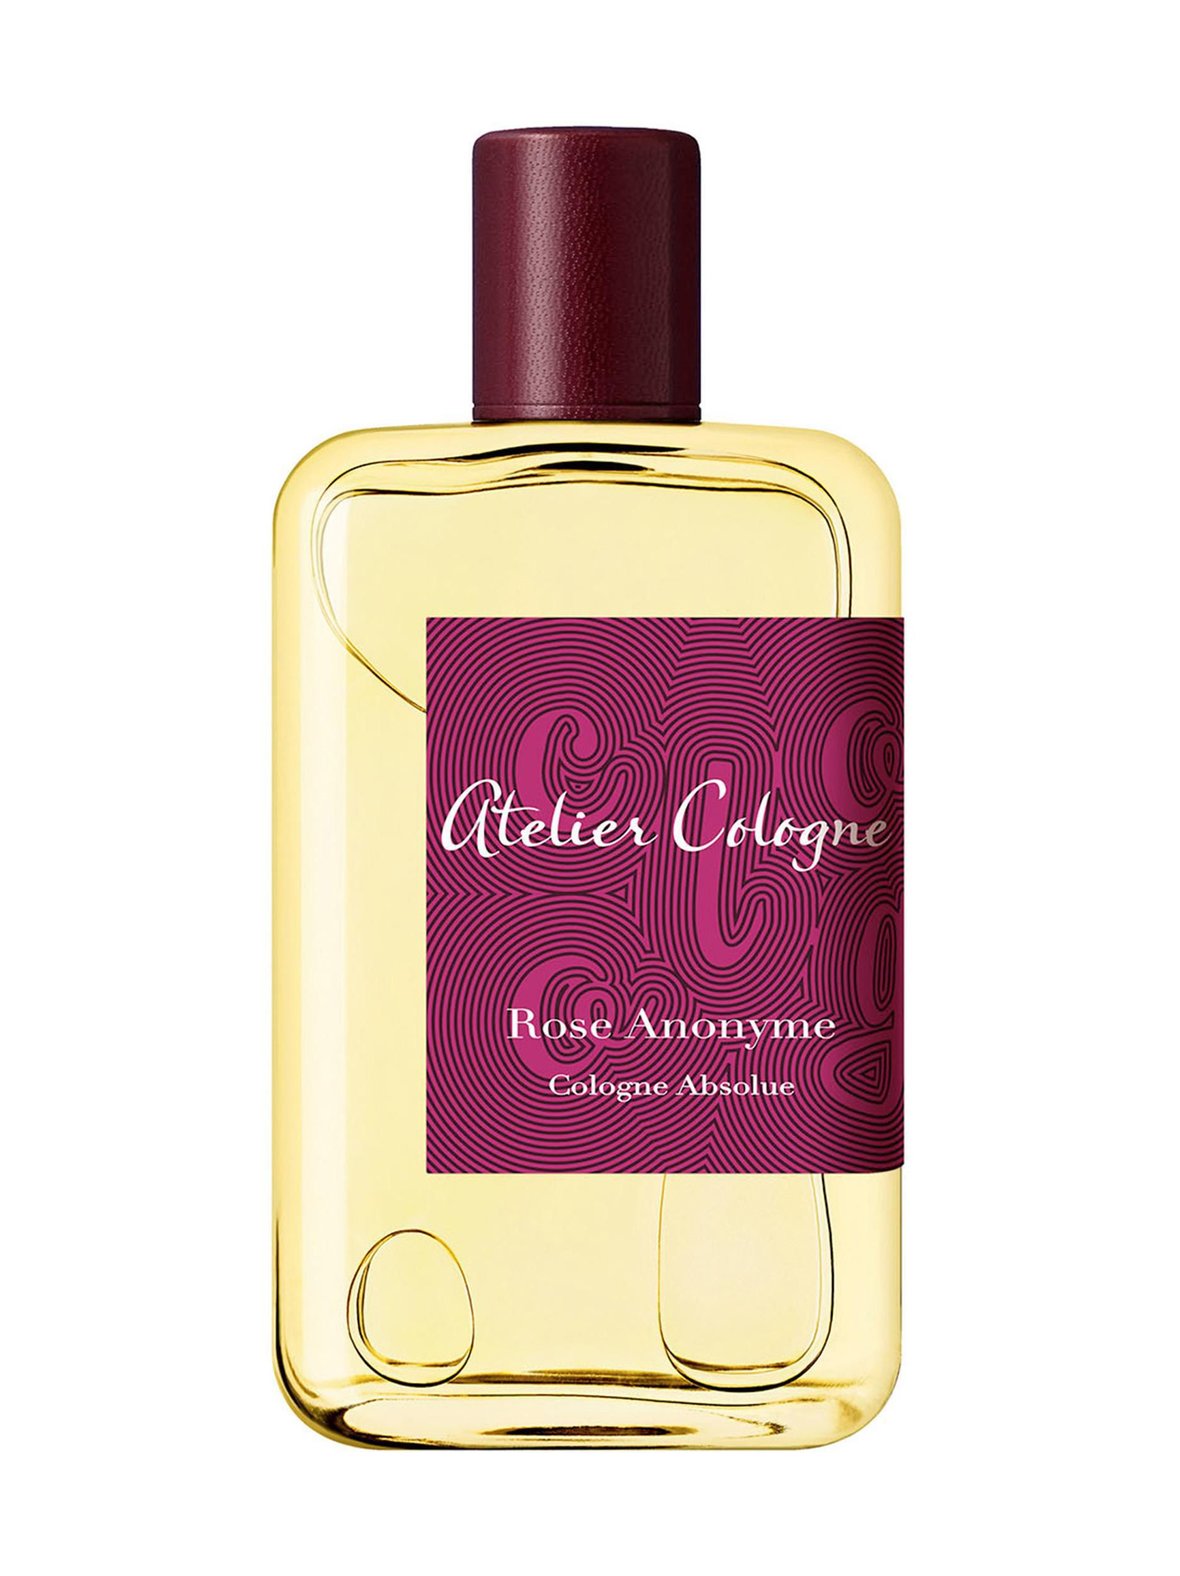 Rose Anonyme Cologne Absolue -tuoksu, Atelier Cologne